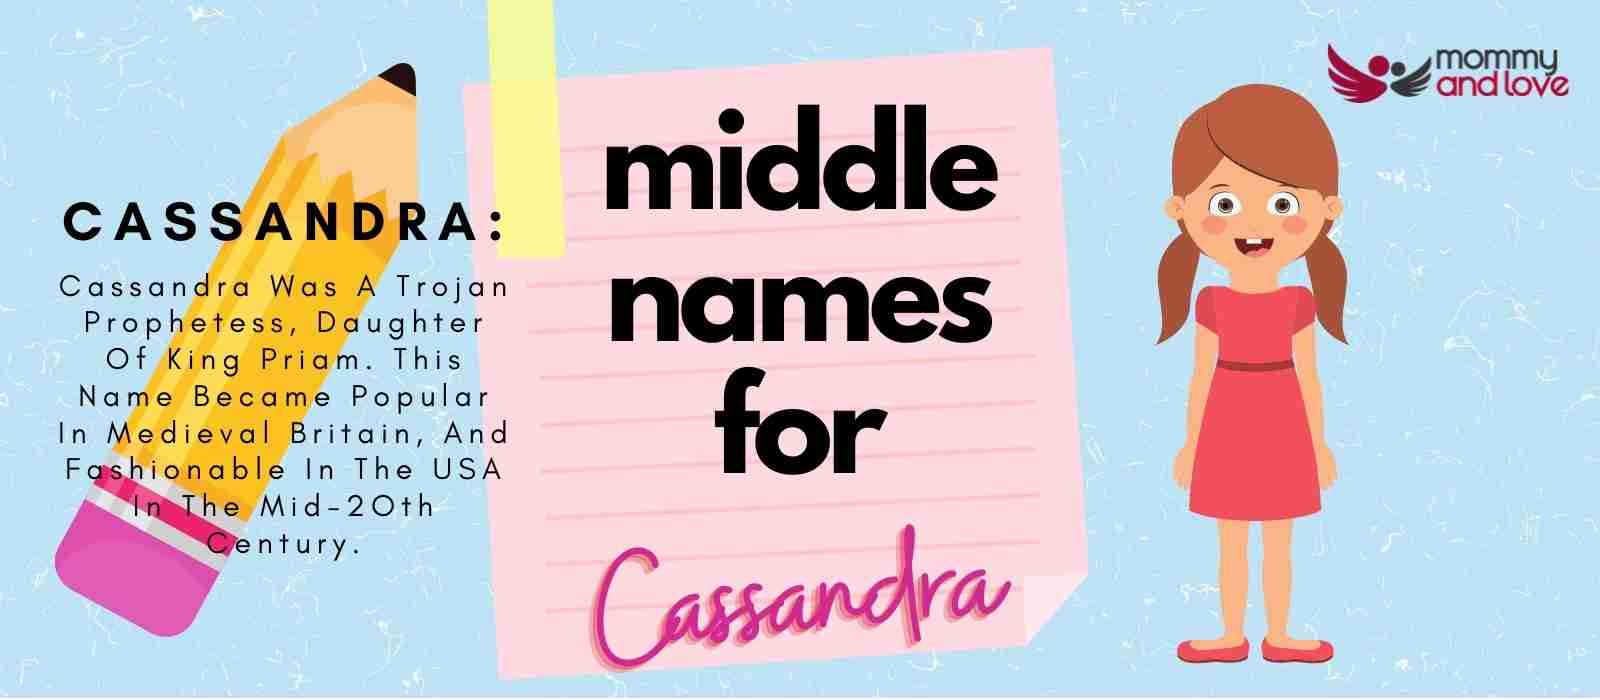 Middle Names for Cassandra